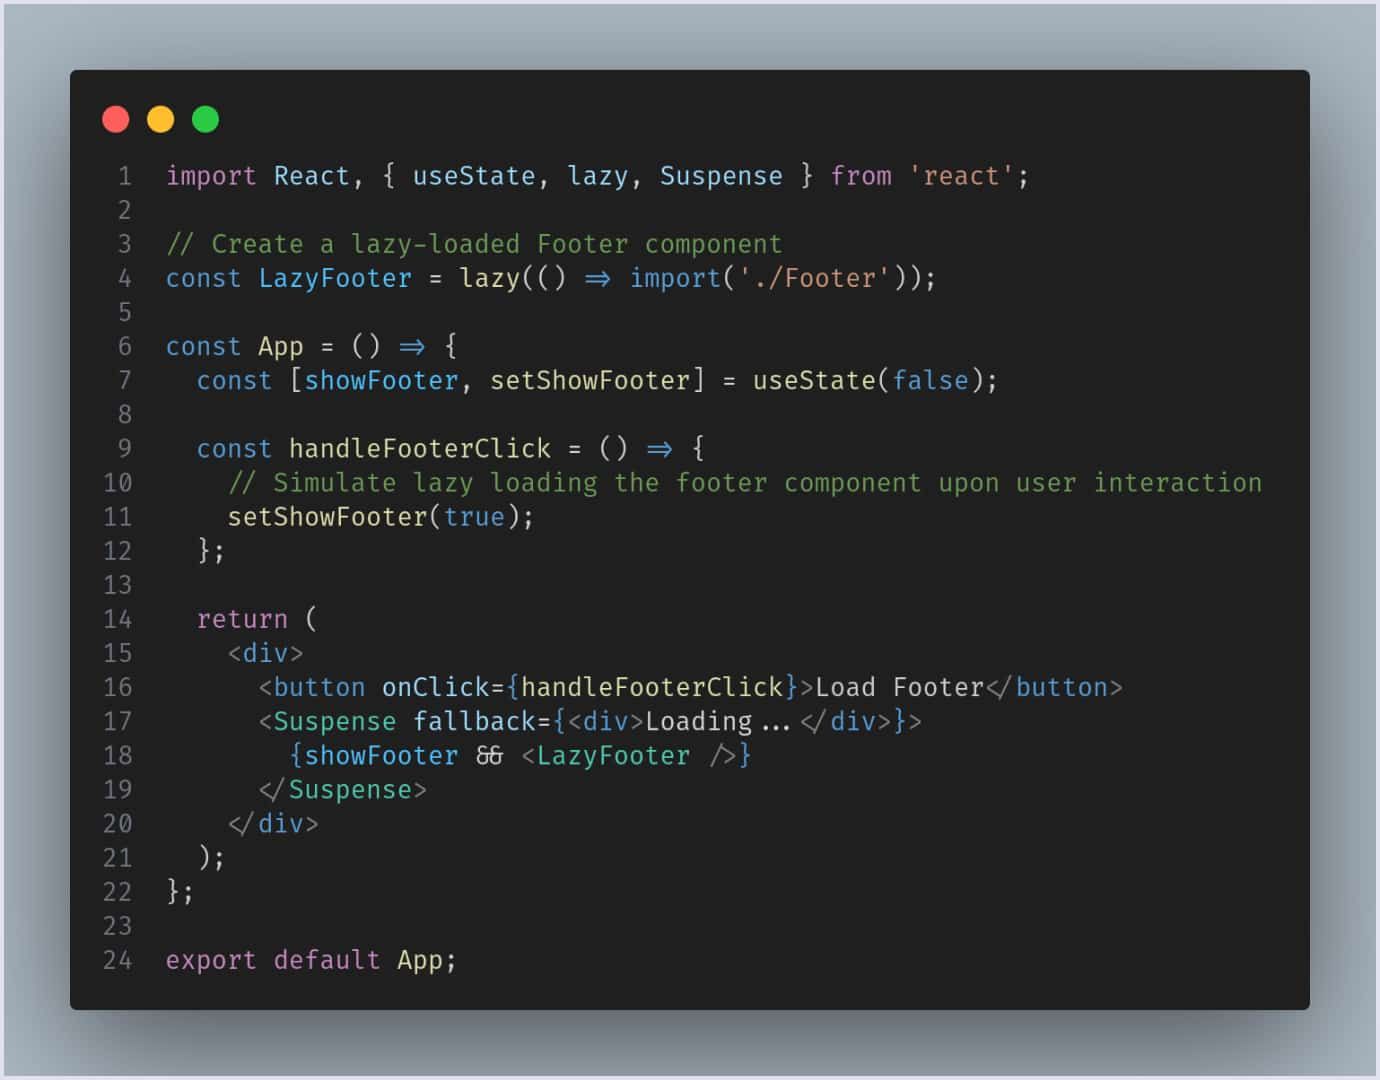 Injected content code in React